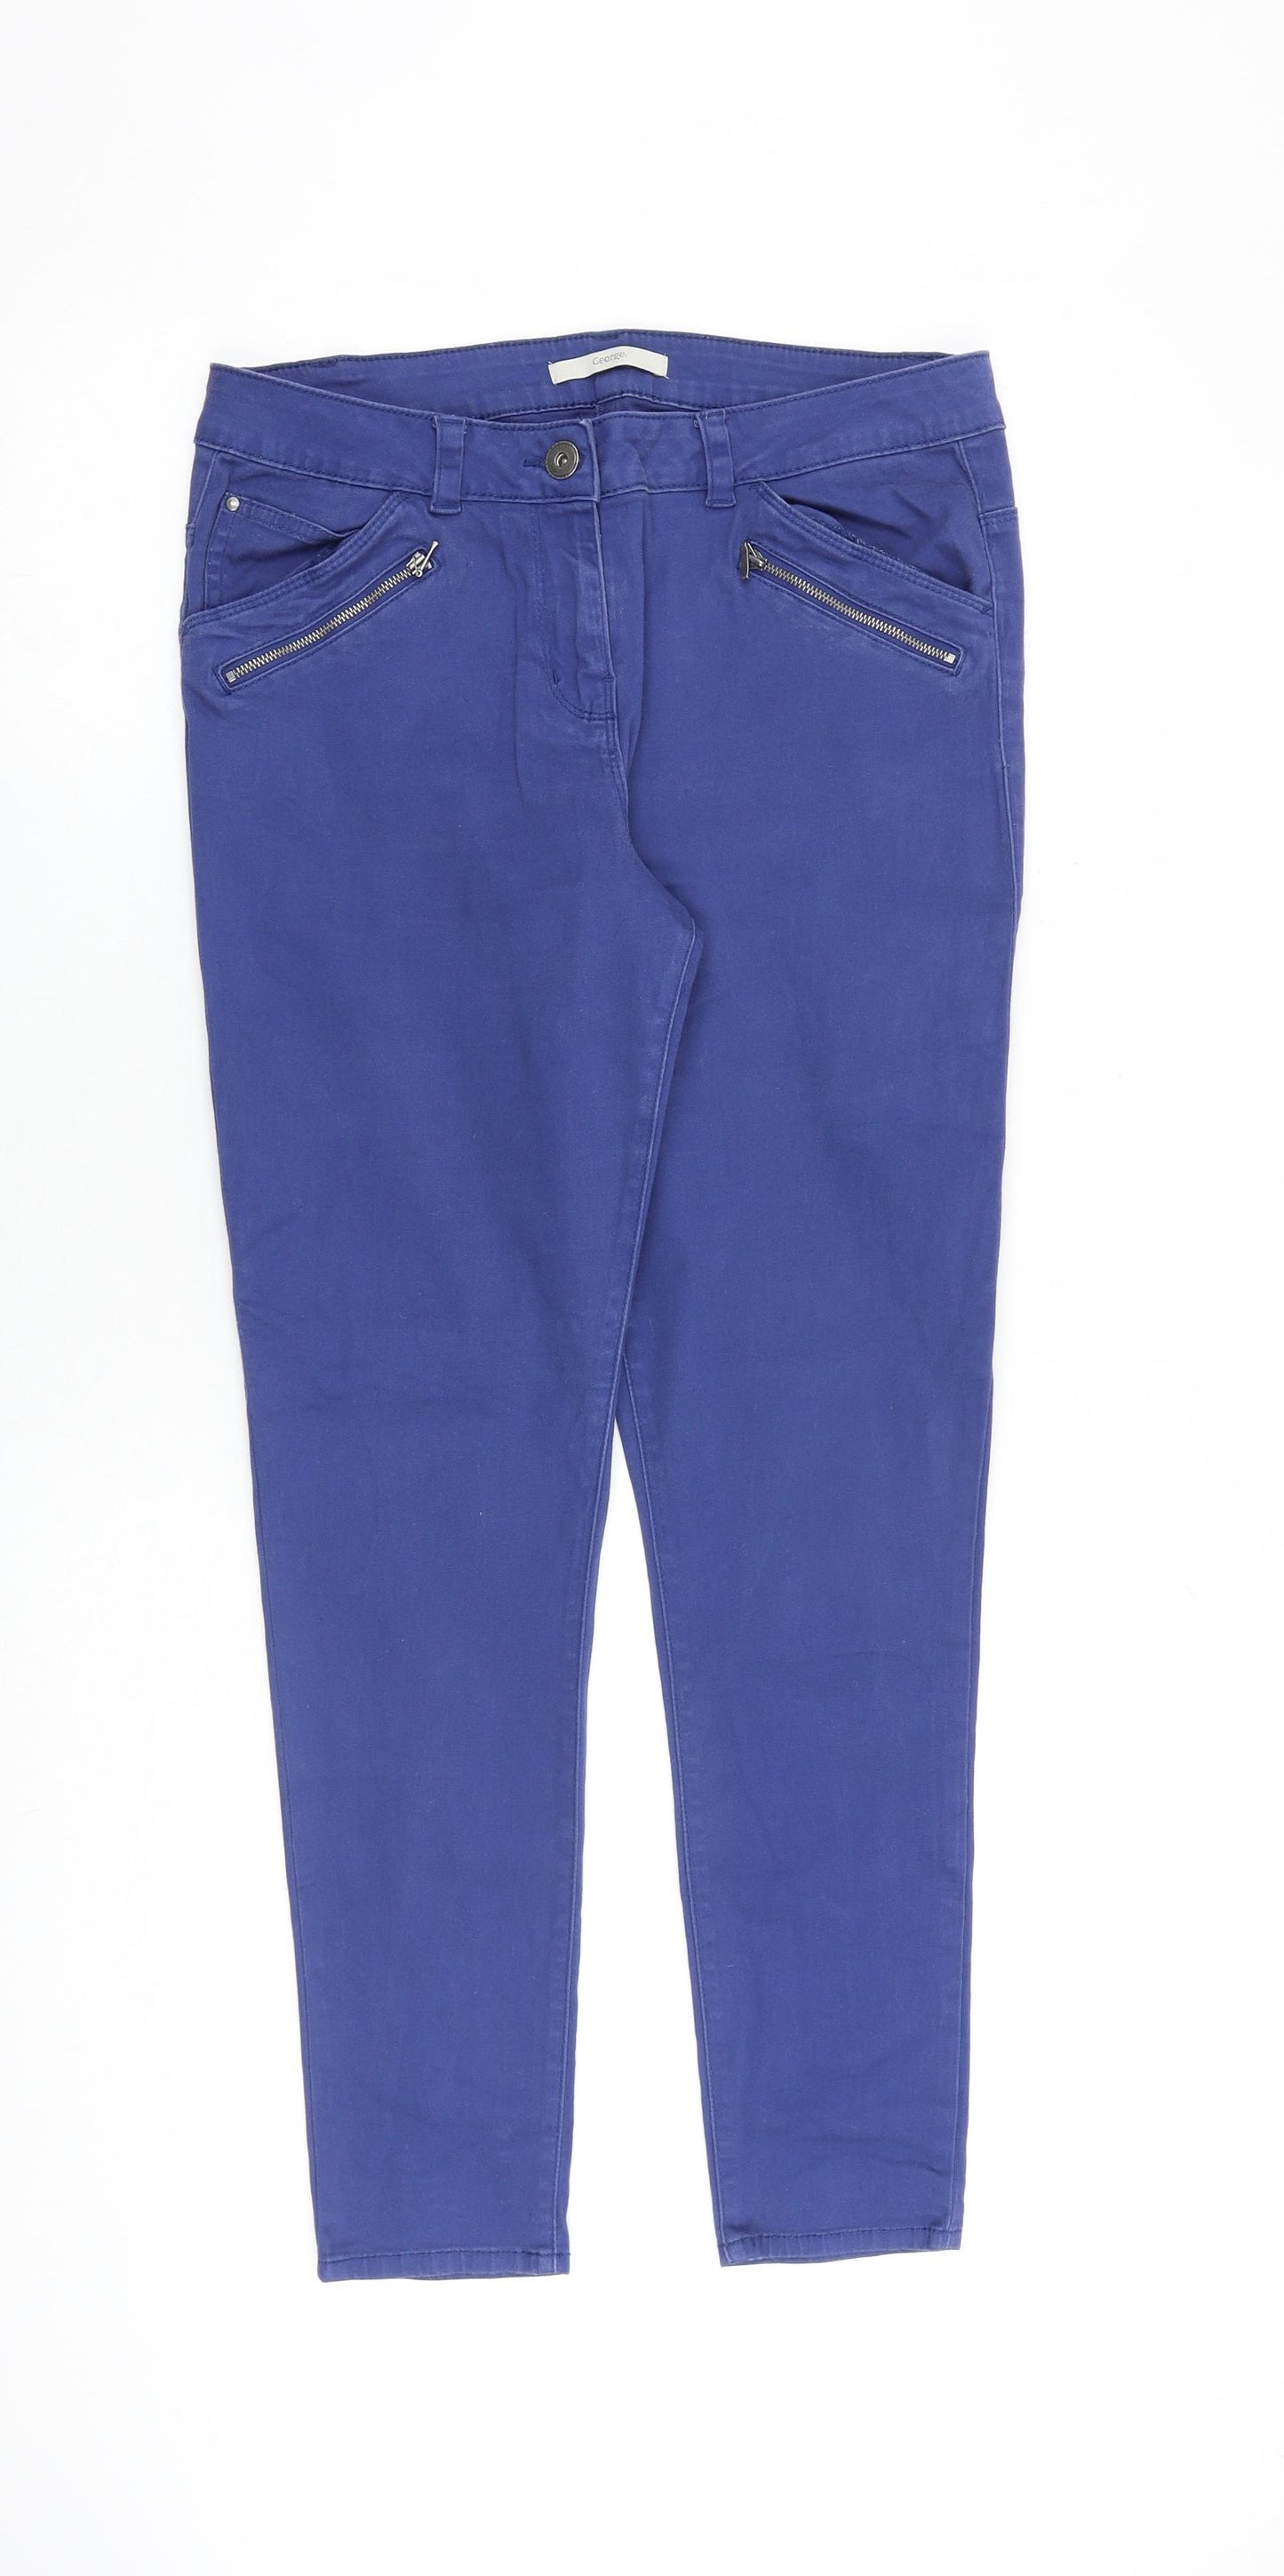 George Womens Blue Cotton Skinny Jeans Size 12 L29 in Slim Zip